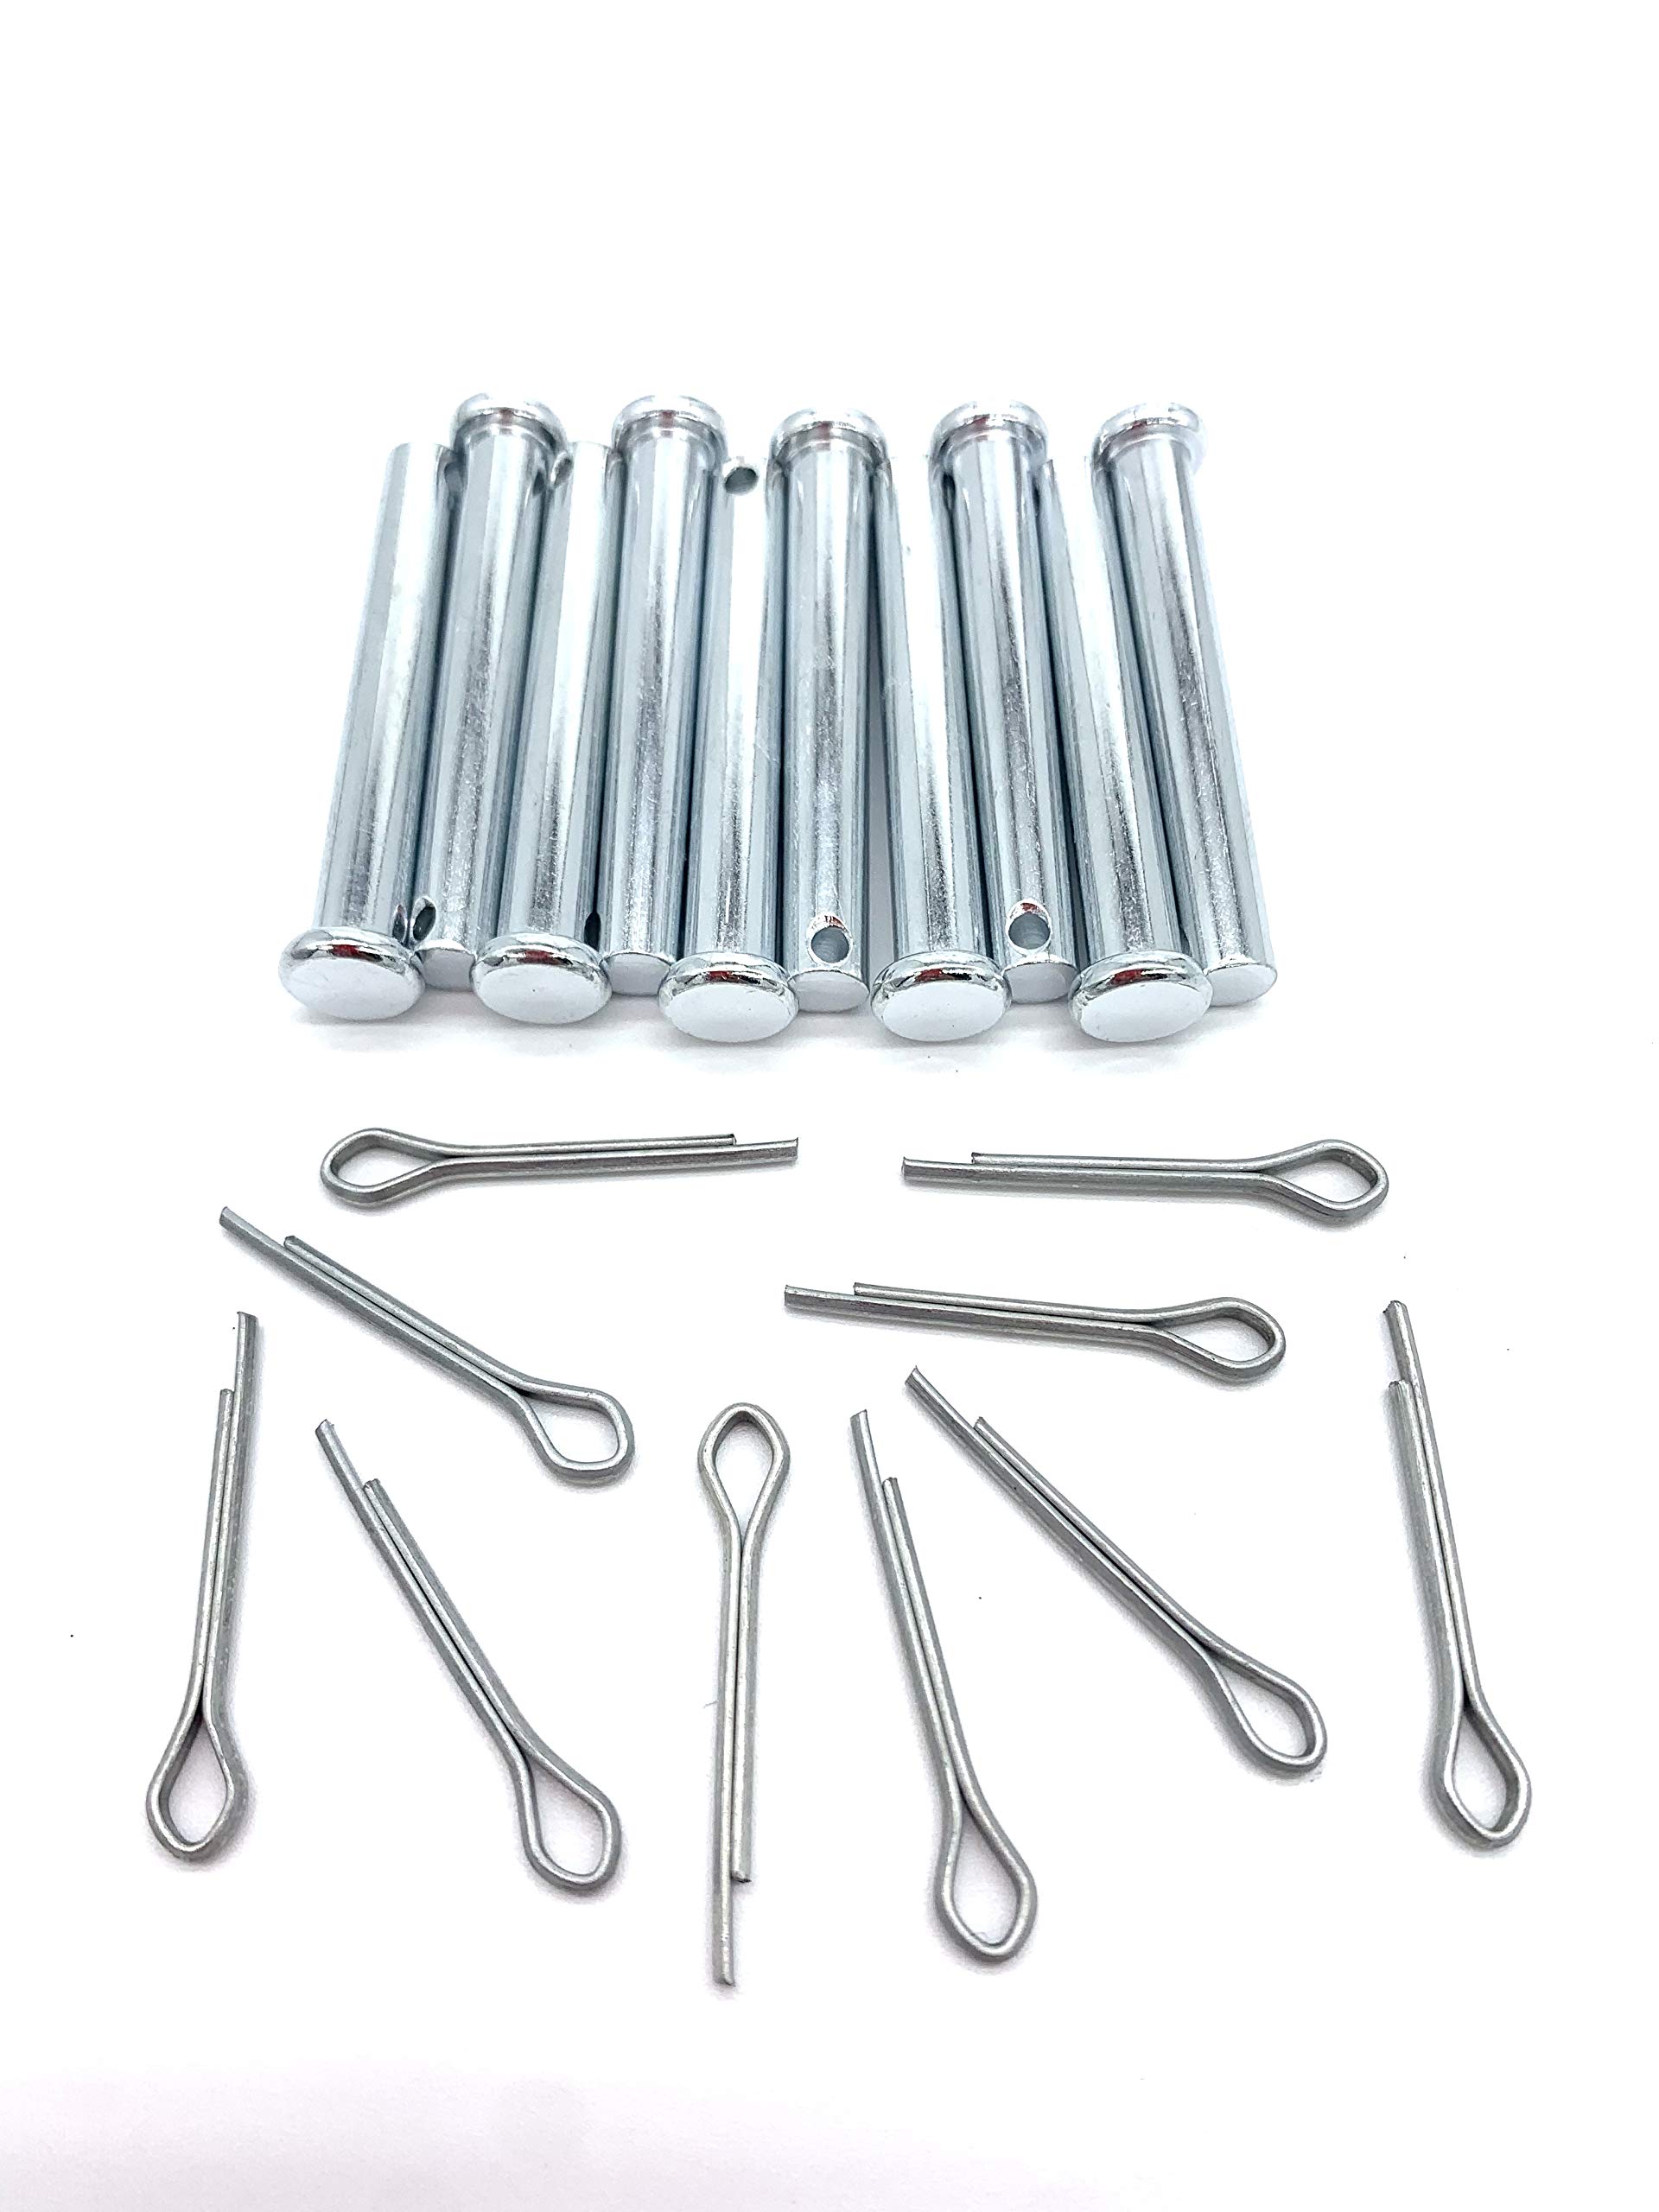 YMHYJY Replacement Simplicity or Snapper Shear Pins for 703063, 1668344, 1686806yp (10 Pack)